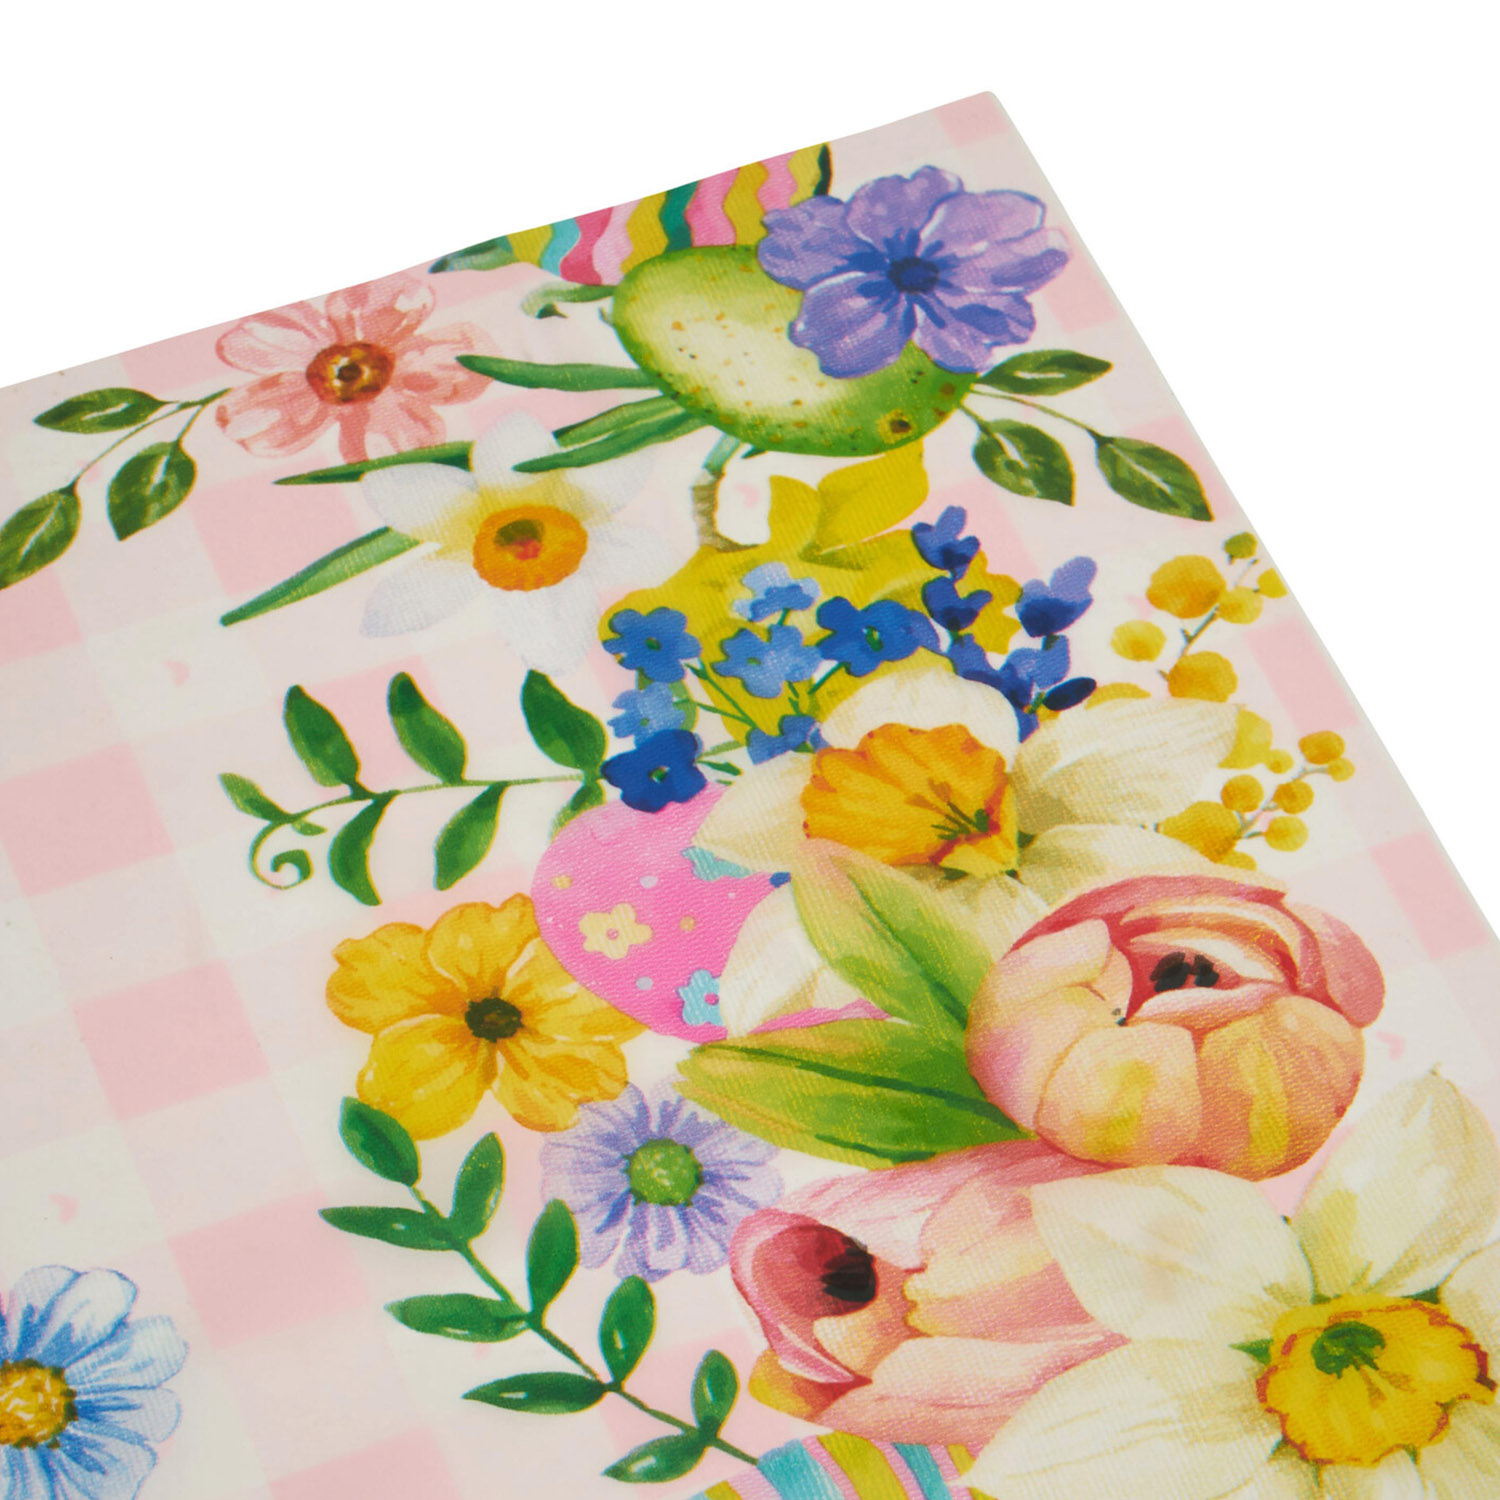 Easter Pink Tablecloth 85.5 x 152cm Image 1